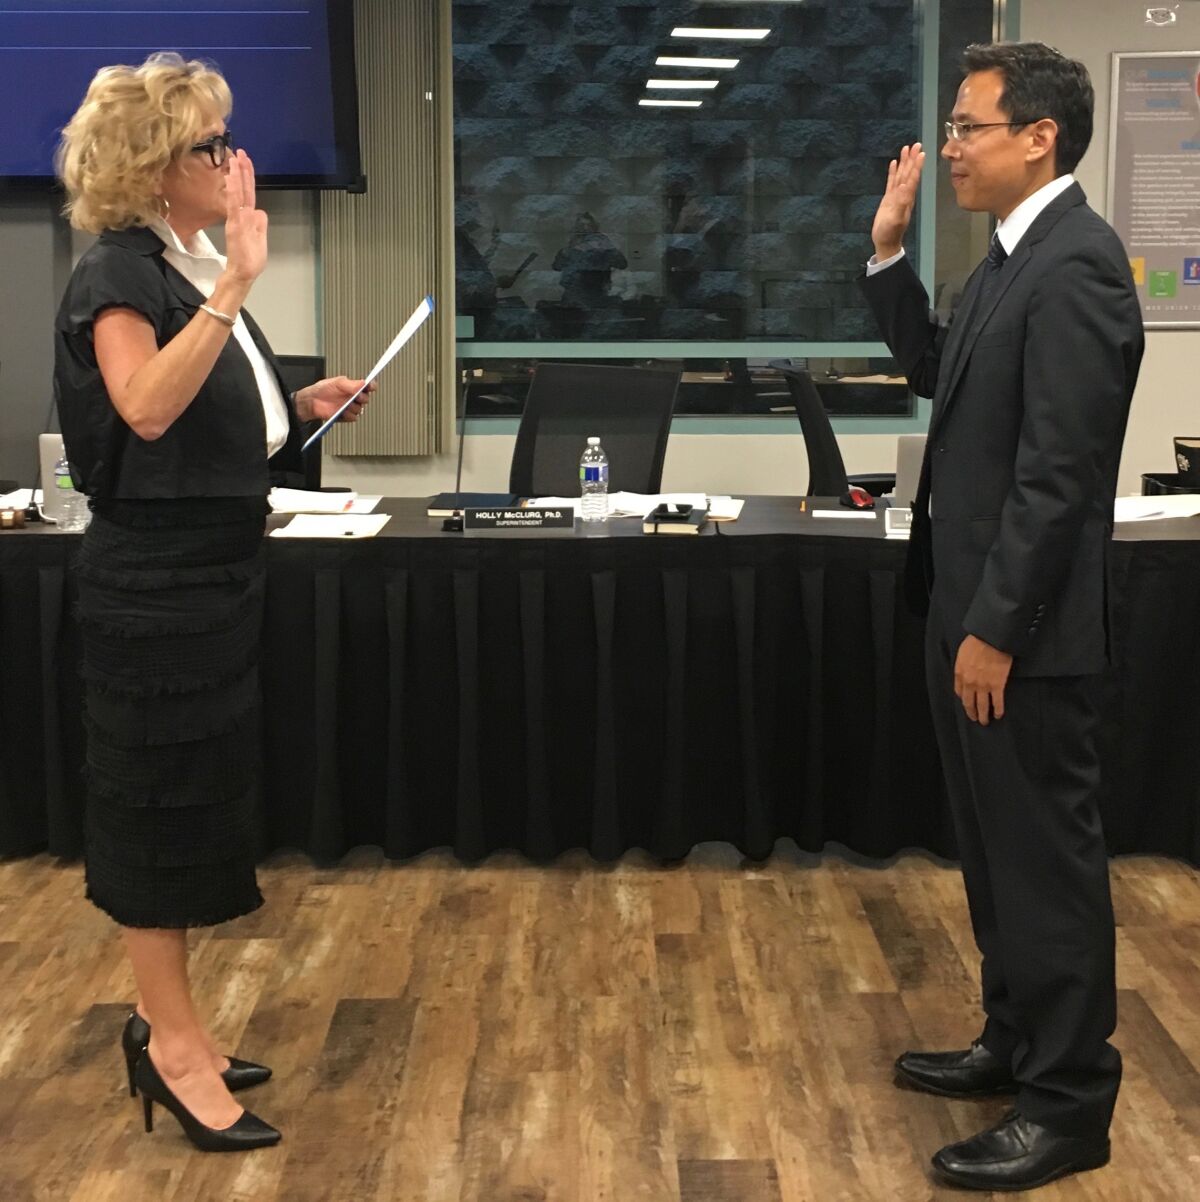 Superintendent Holly McClurg issues the oath of office to Gee Wah Mok.